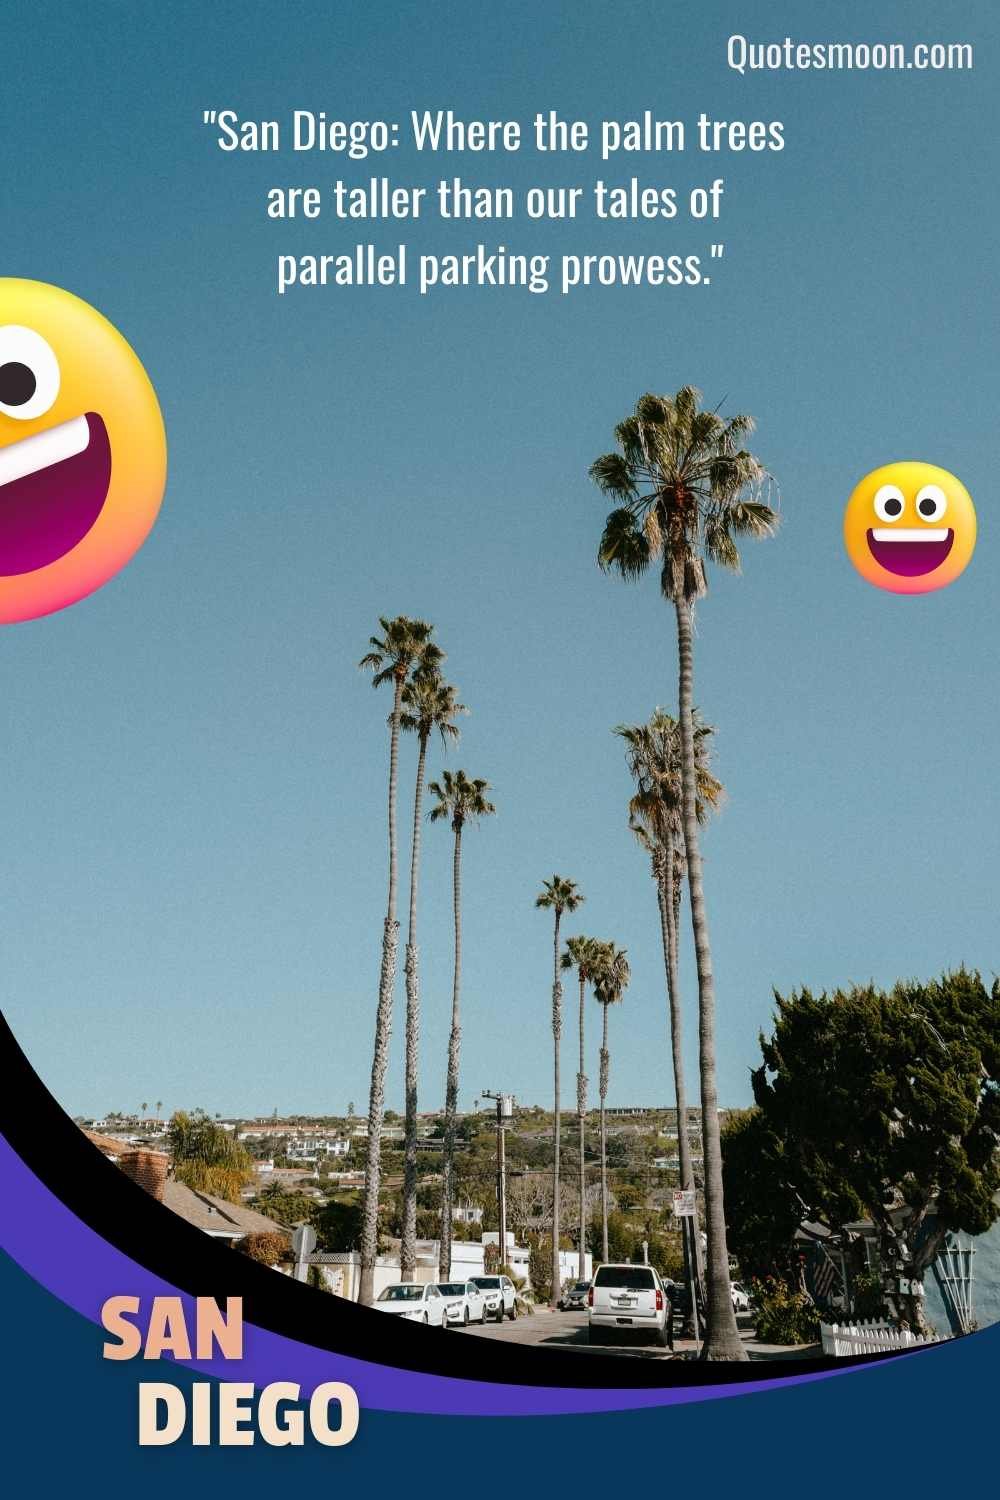 Best San Diego quotes For Instagram-Selfies